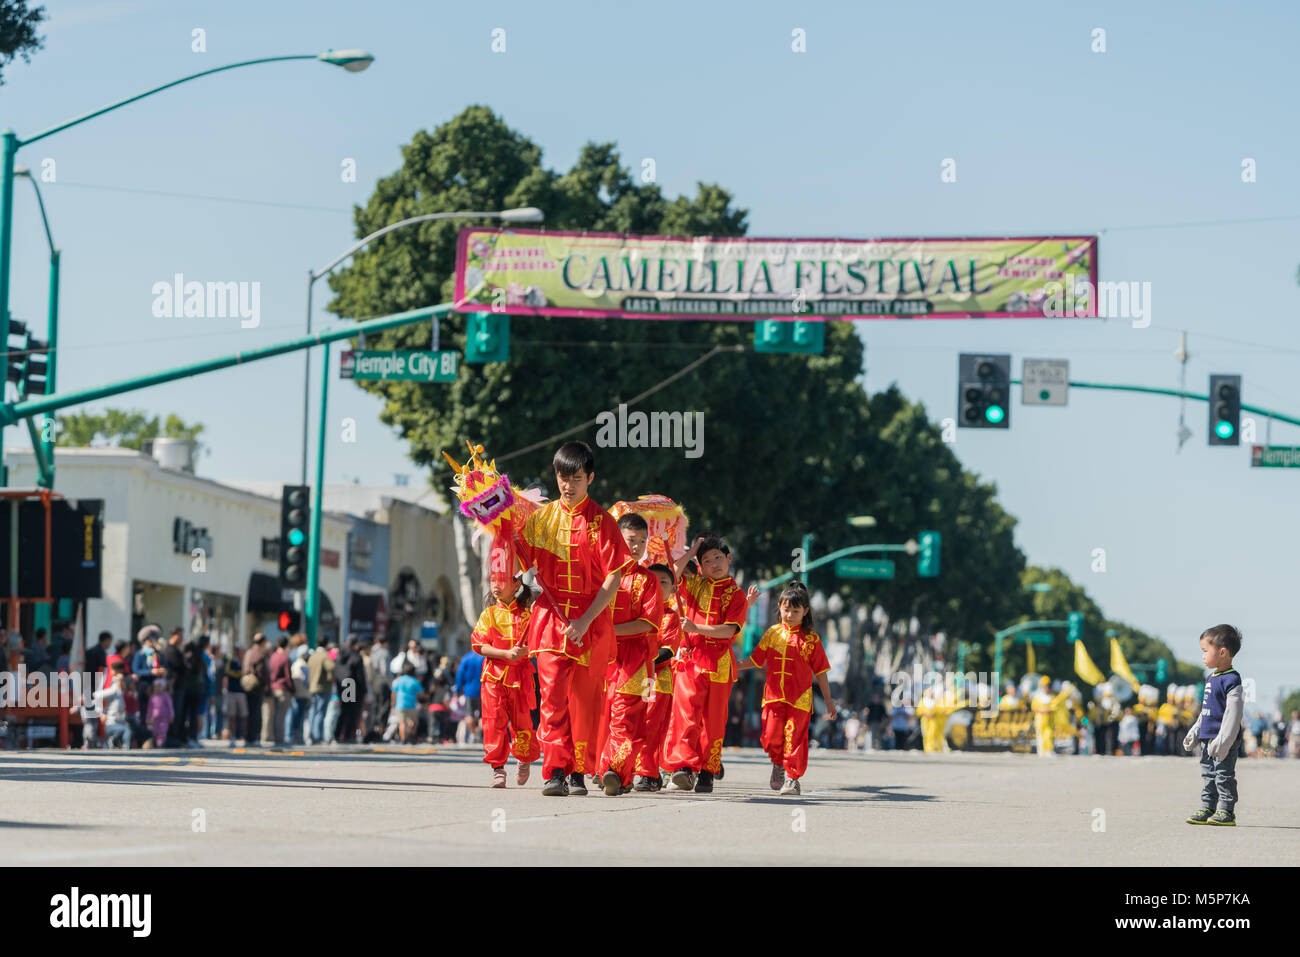 Temple City, Los Angeles, California, USA. 24th February, 2018. Chinese dragon dance of the famous 74th Camellia Festival Parade on FEB 24, 2018 at Temple City, Los Angeles County, California Credit: Chon Kit Leong/Alamy Live News Stock Photo